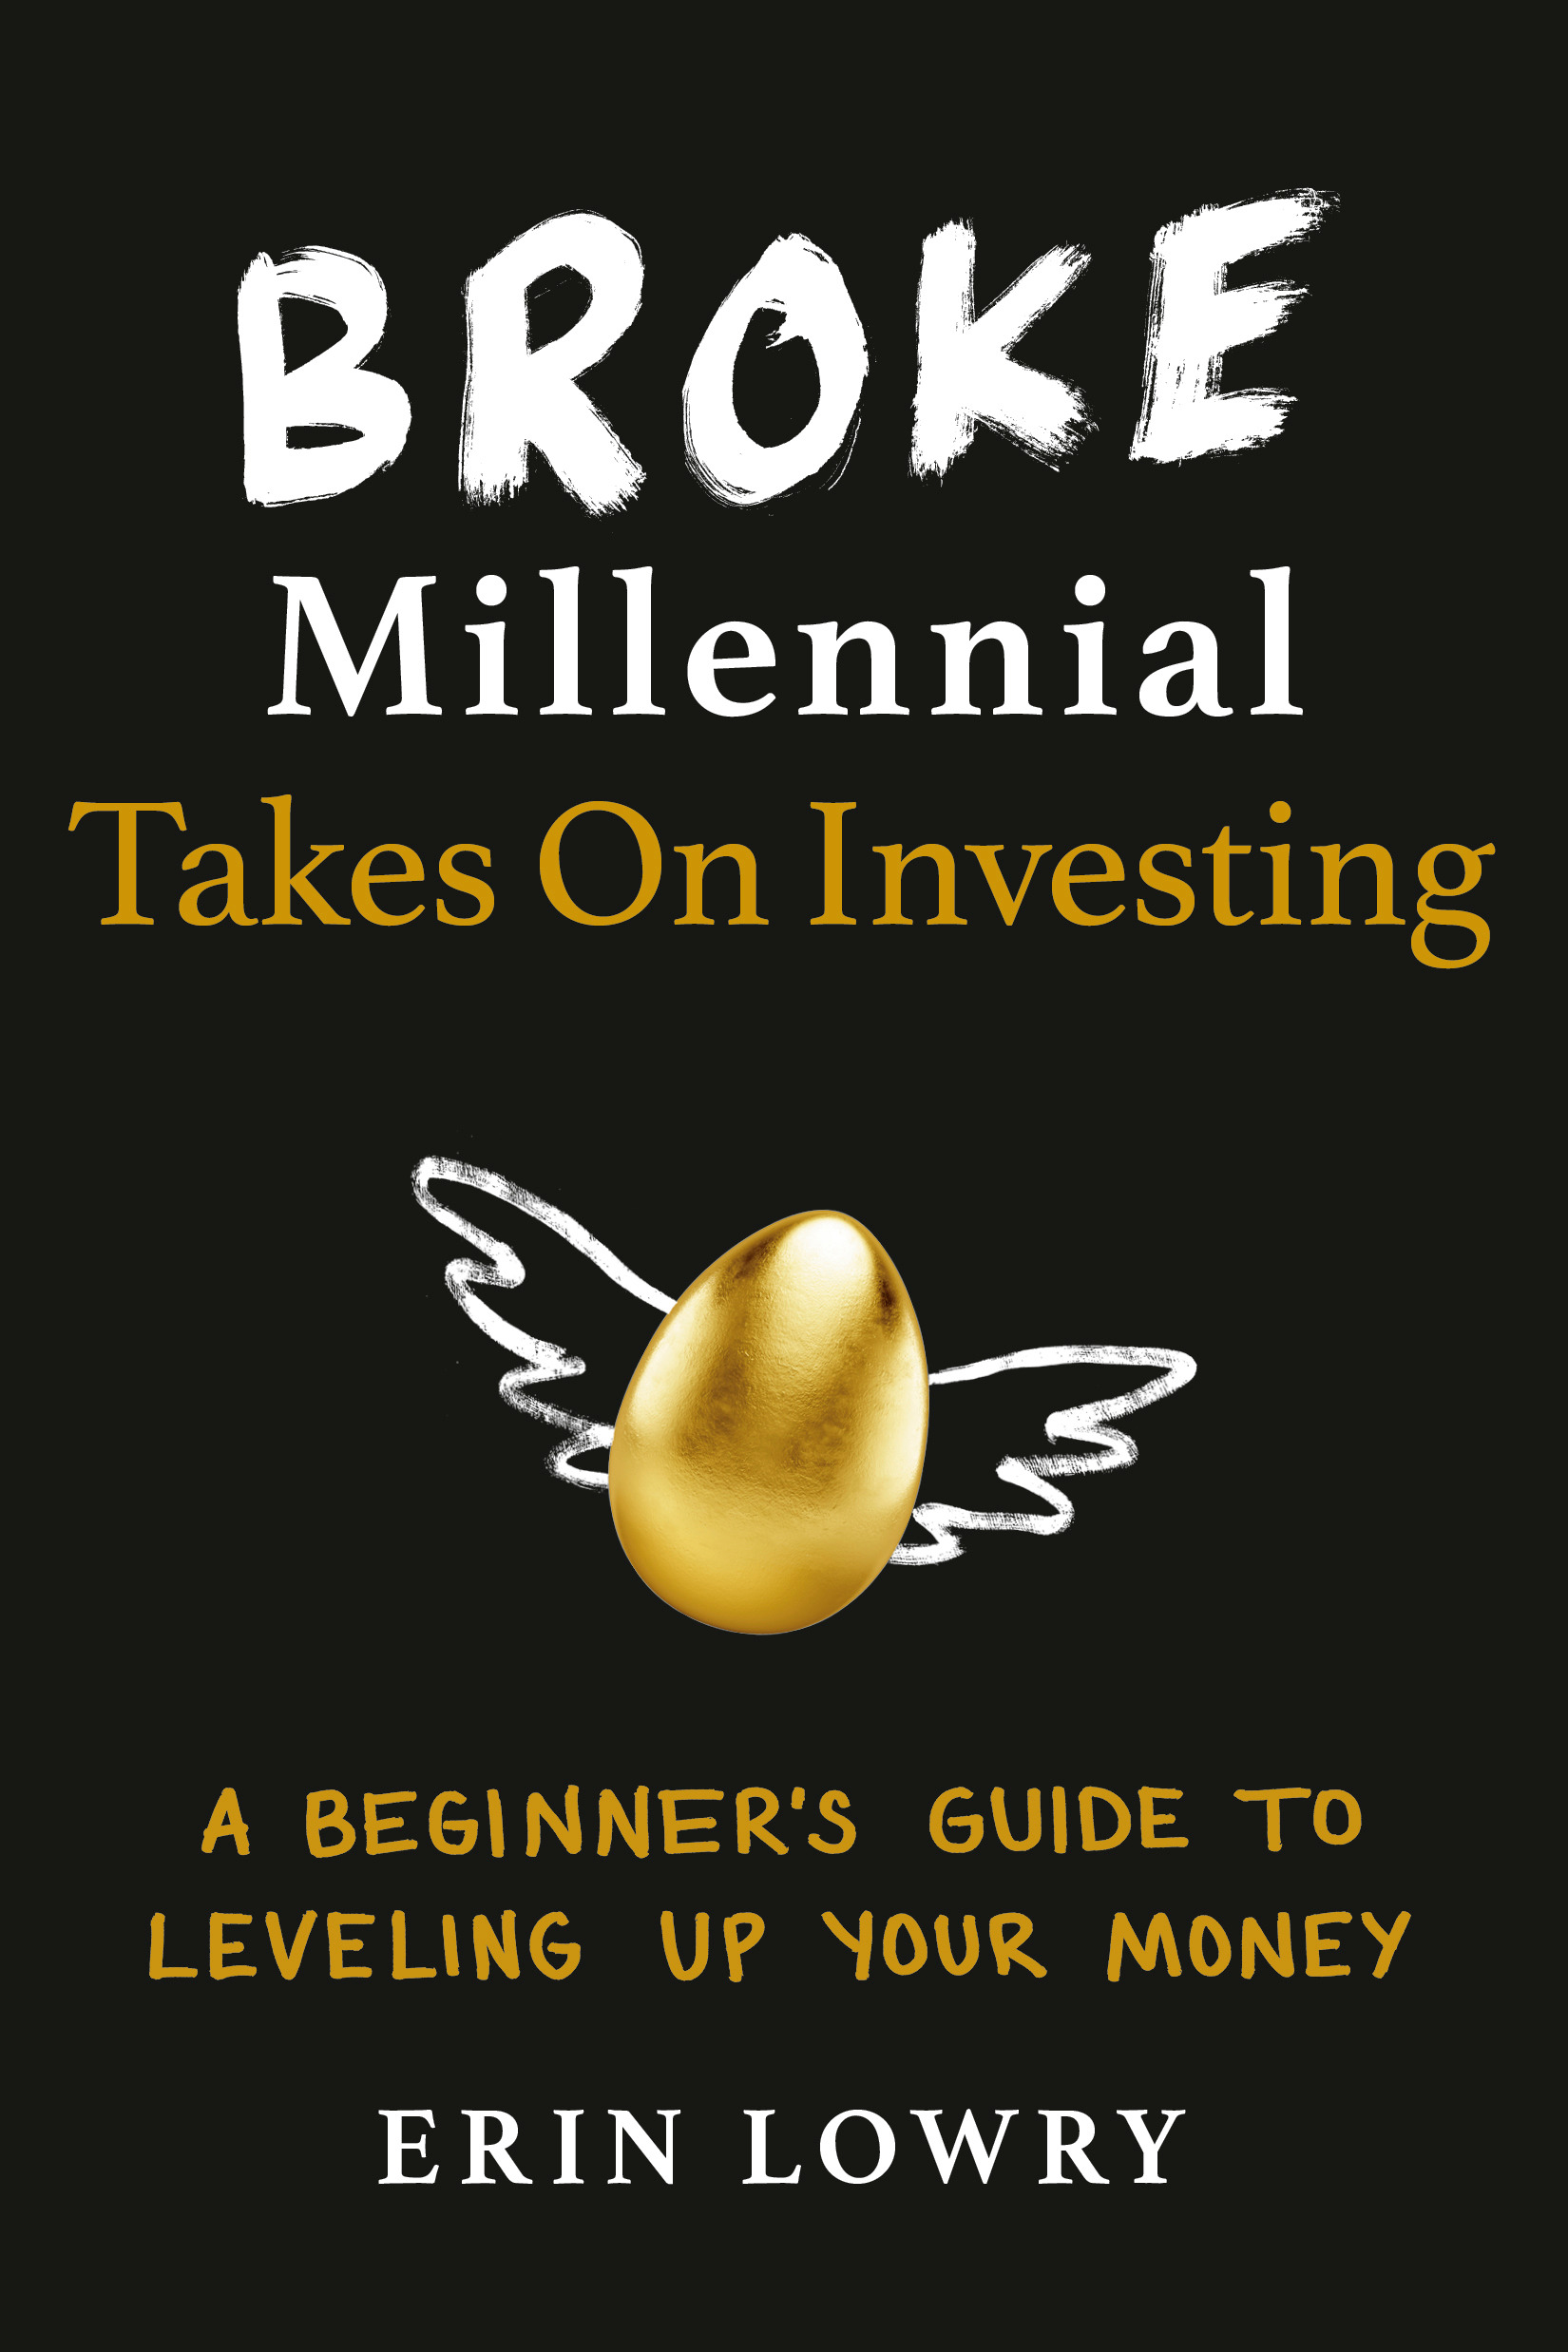 Broke Millennial Takes On Investing : A Beginner's Guide to Leveling Up Your Money | Business & Management